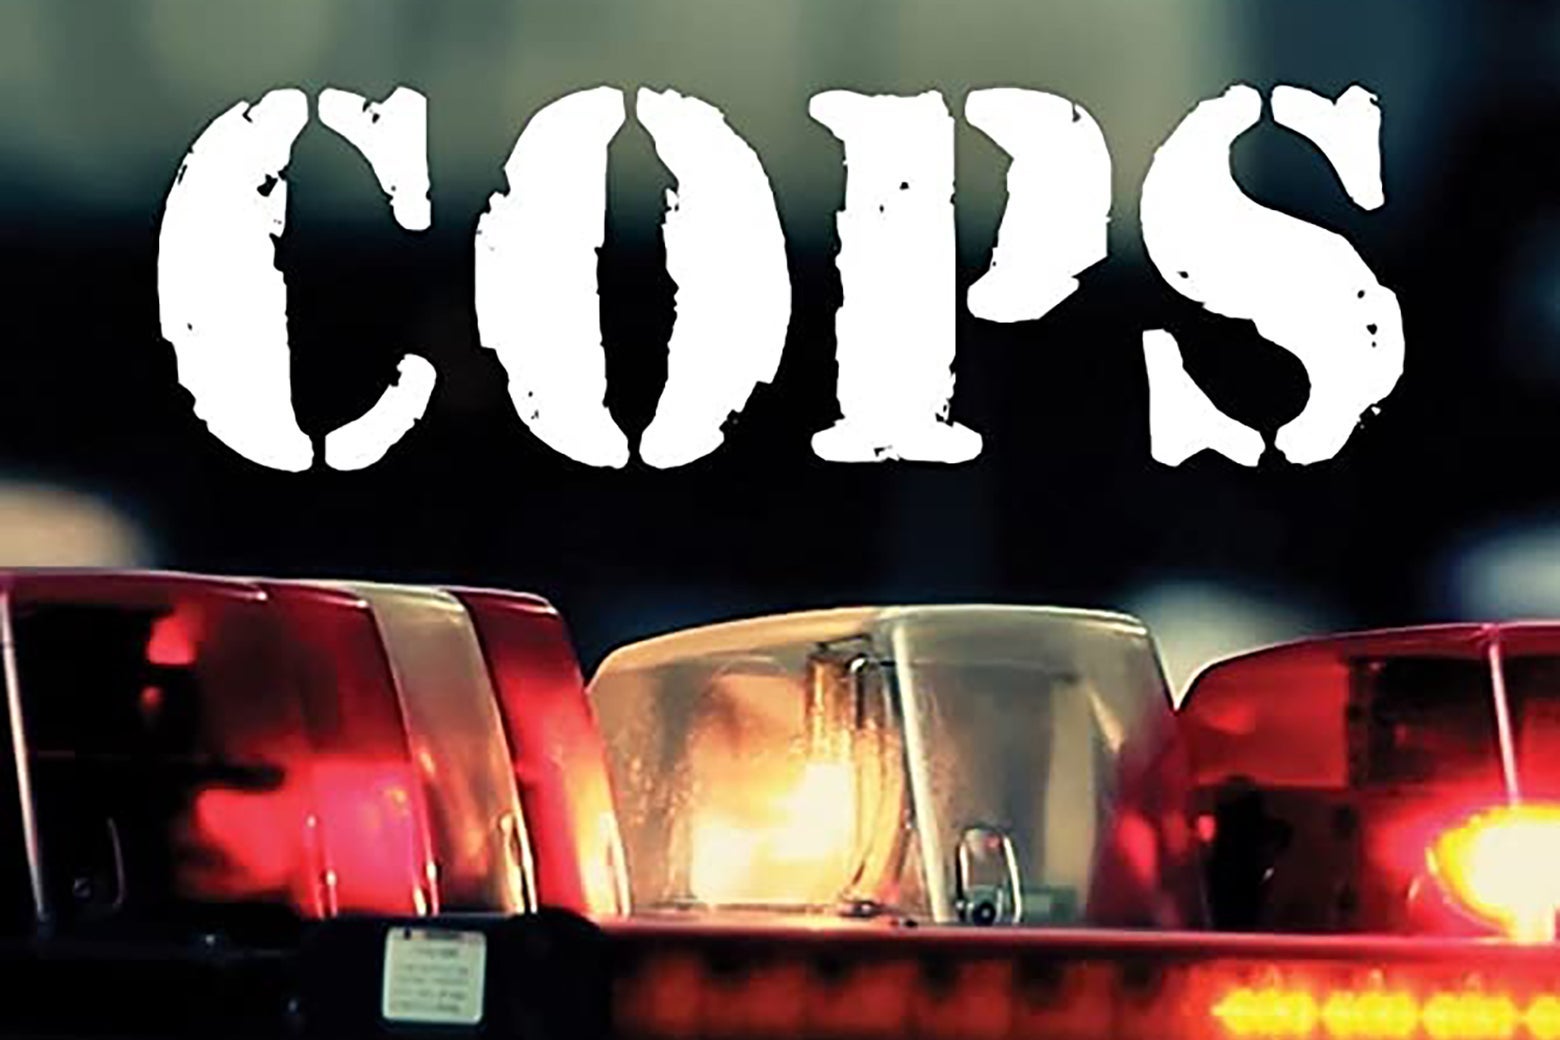 The logo for the TV show Cops, showing a patrol car's flashing lights.